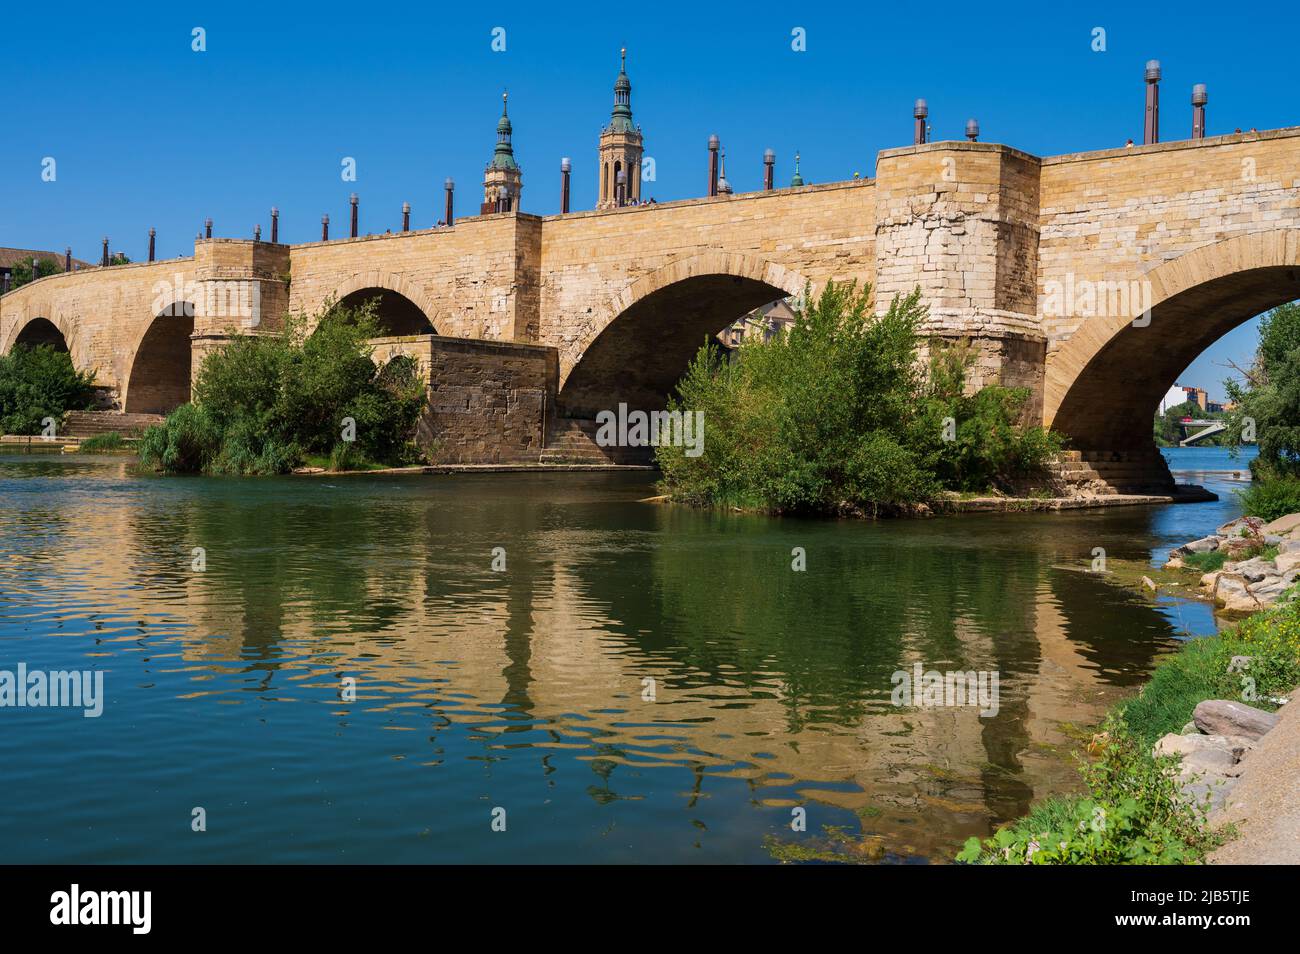 Stone Bridge (Puente de Piedra) and Cathedral-Basilica of Our Lady of the Pillar, a Roman Catholic church in the city of Zaragoza, Aragon, Spain Stock Photo